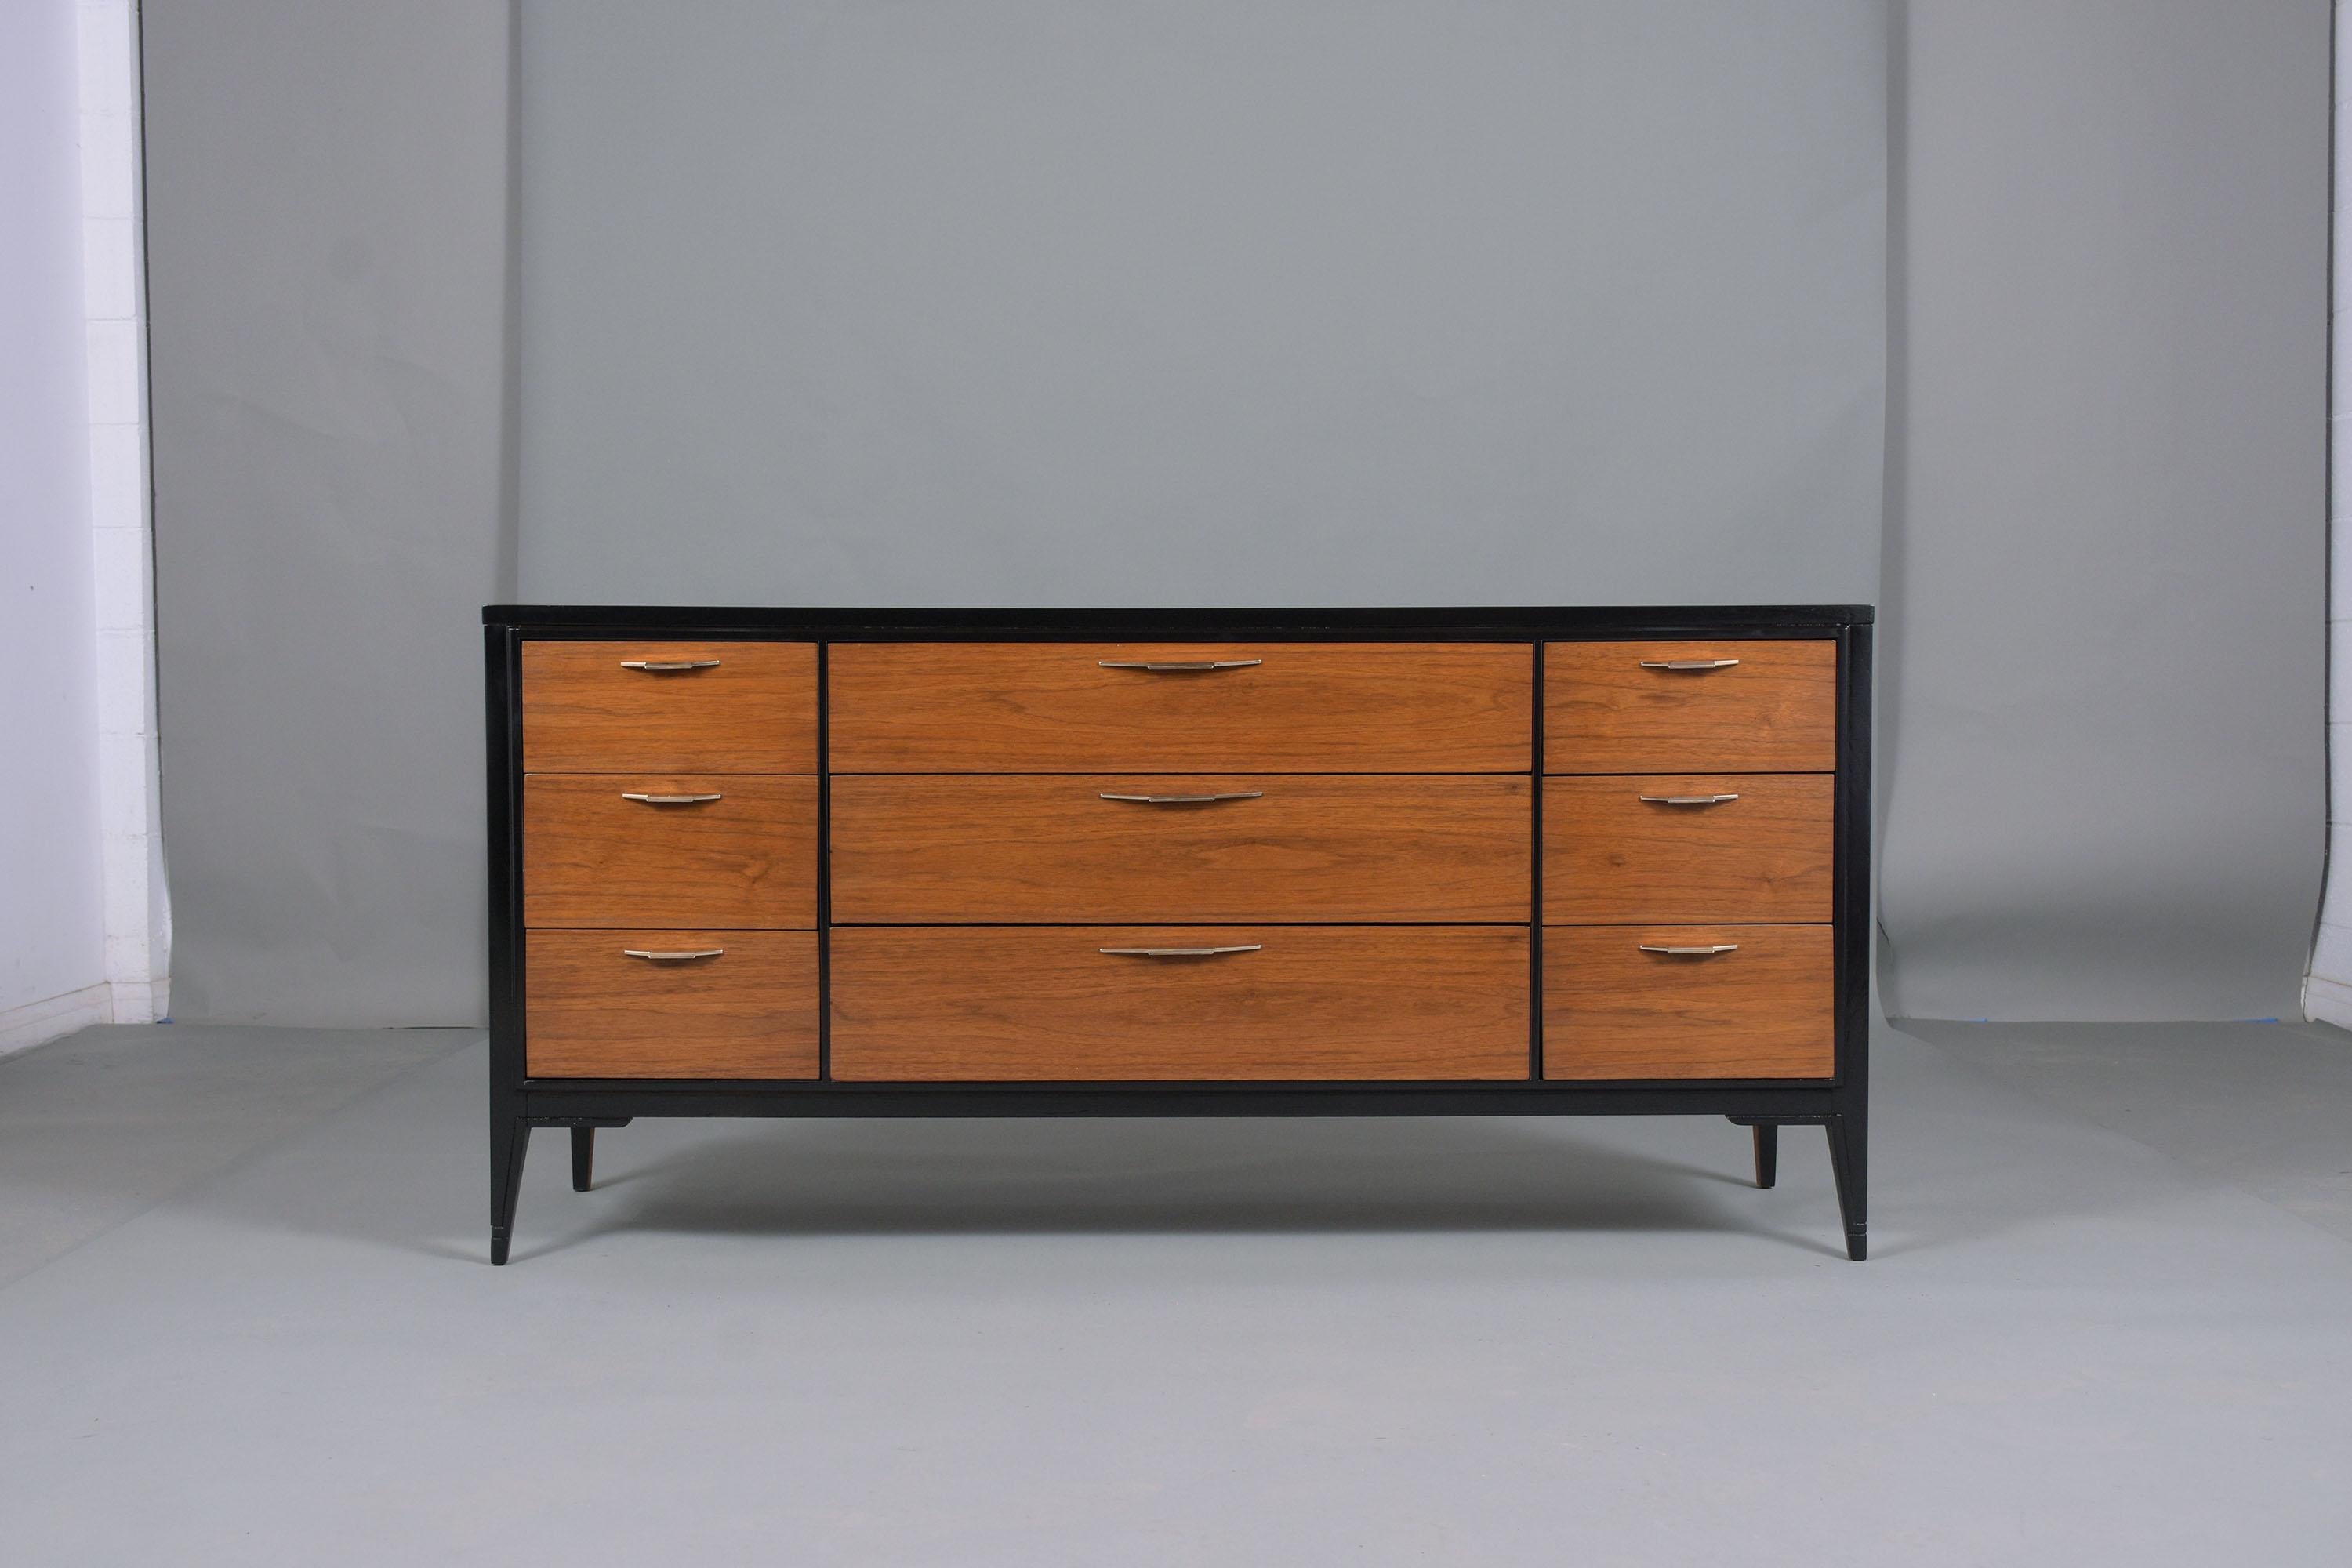 An extraordinary mid-century lacquered chest of drawers is crafted out of walnut wood and has been newly stained in a walnut & ebonized color combination with lacquered finish by our team of expert craftsmen. This dresser has nine drawers and all